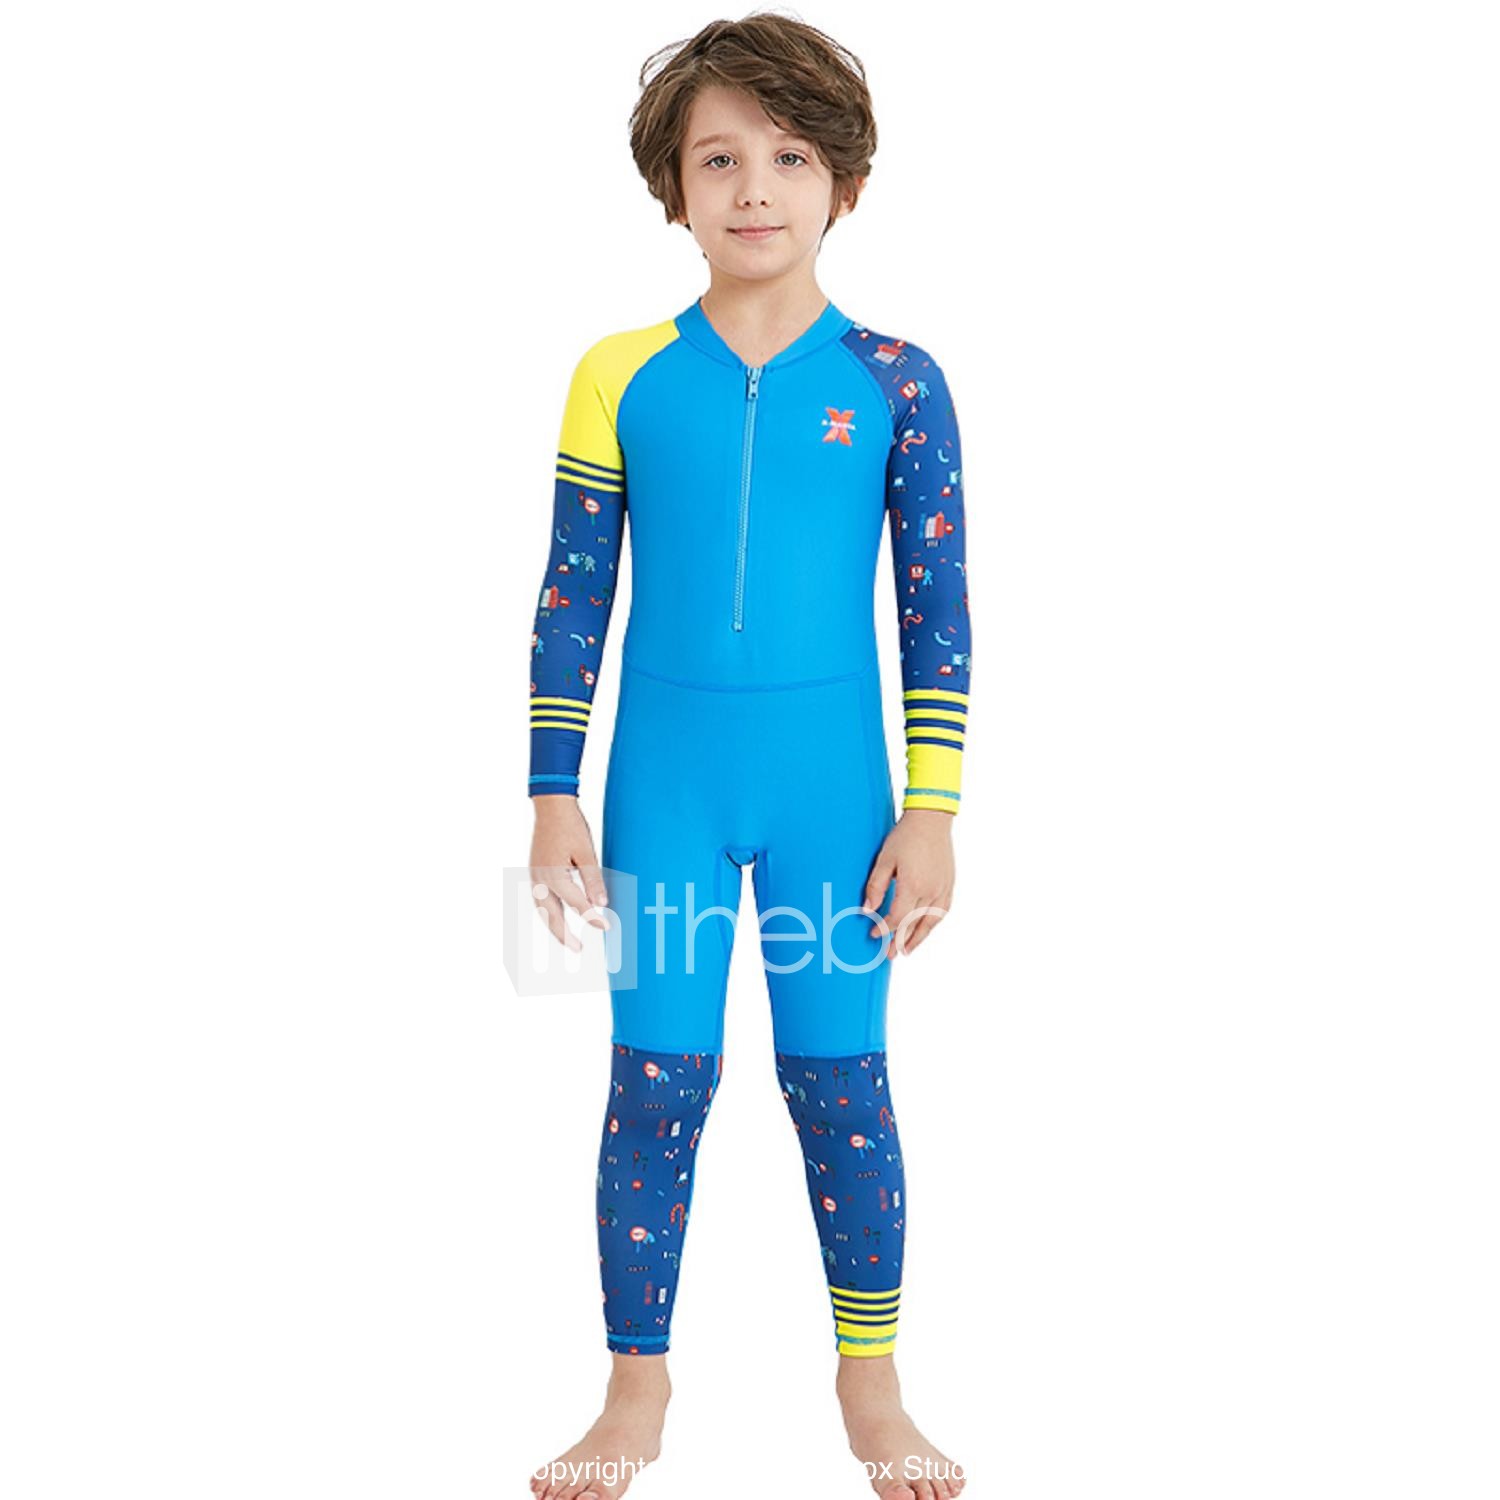 ZCCO Kids Swimsuit Girls and Boys Long Sleeve UV Sun Protection Full Body Rash Guard for Swimming Scuba Diving Snorkeling Pool Multi Water Sports One Piece Dive Skin Wet Suit